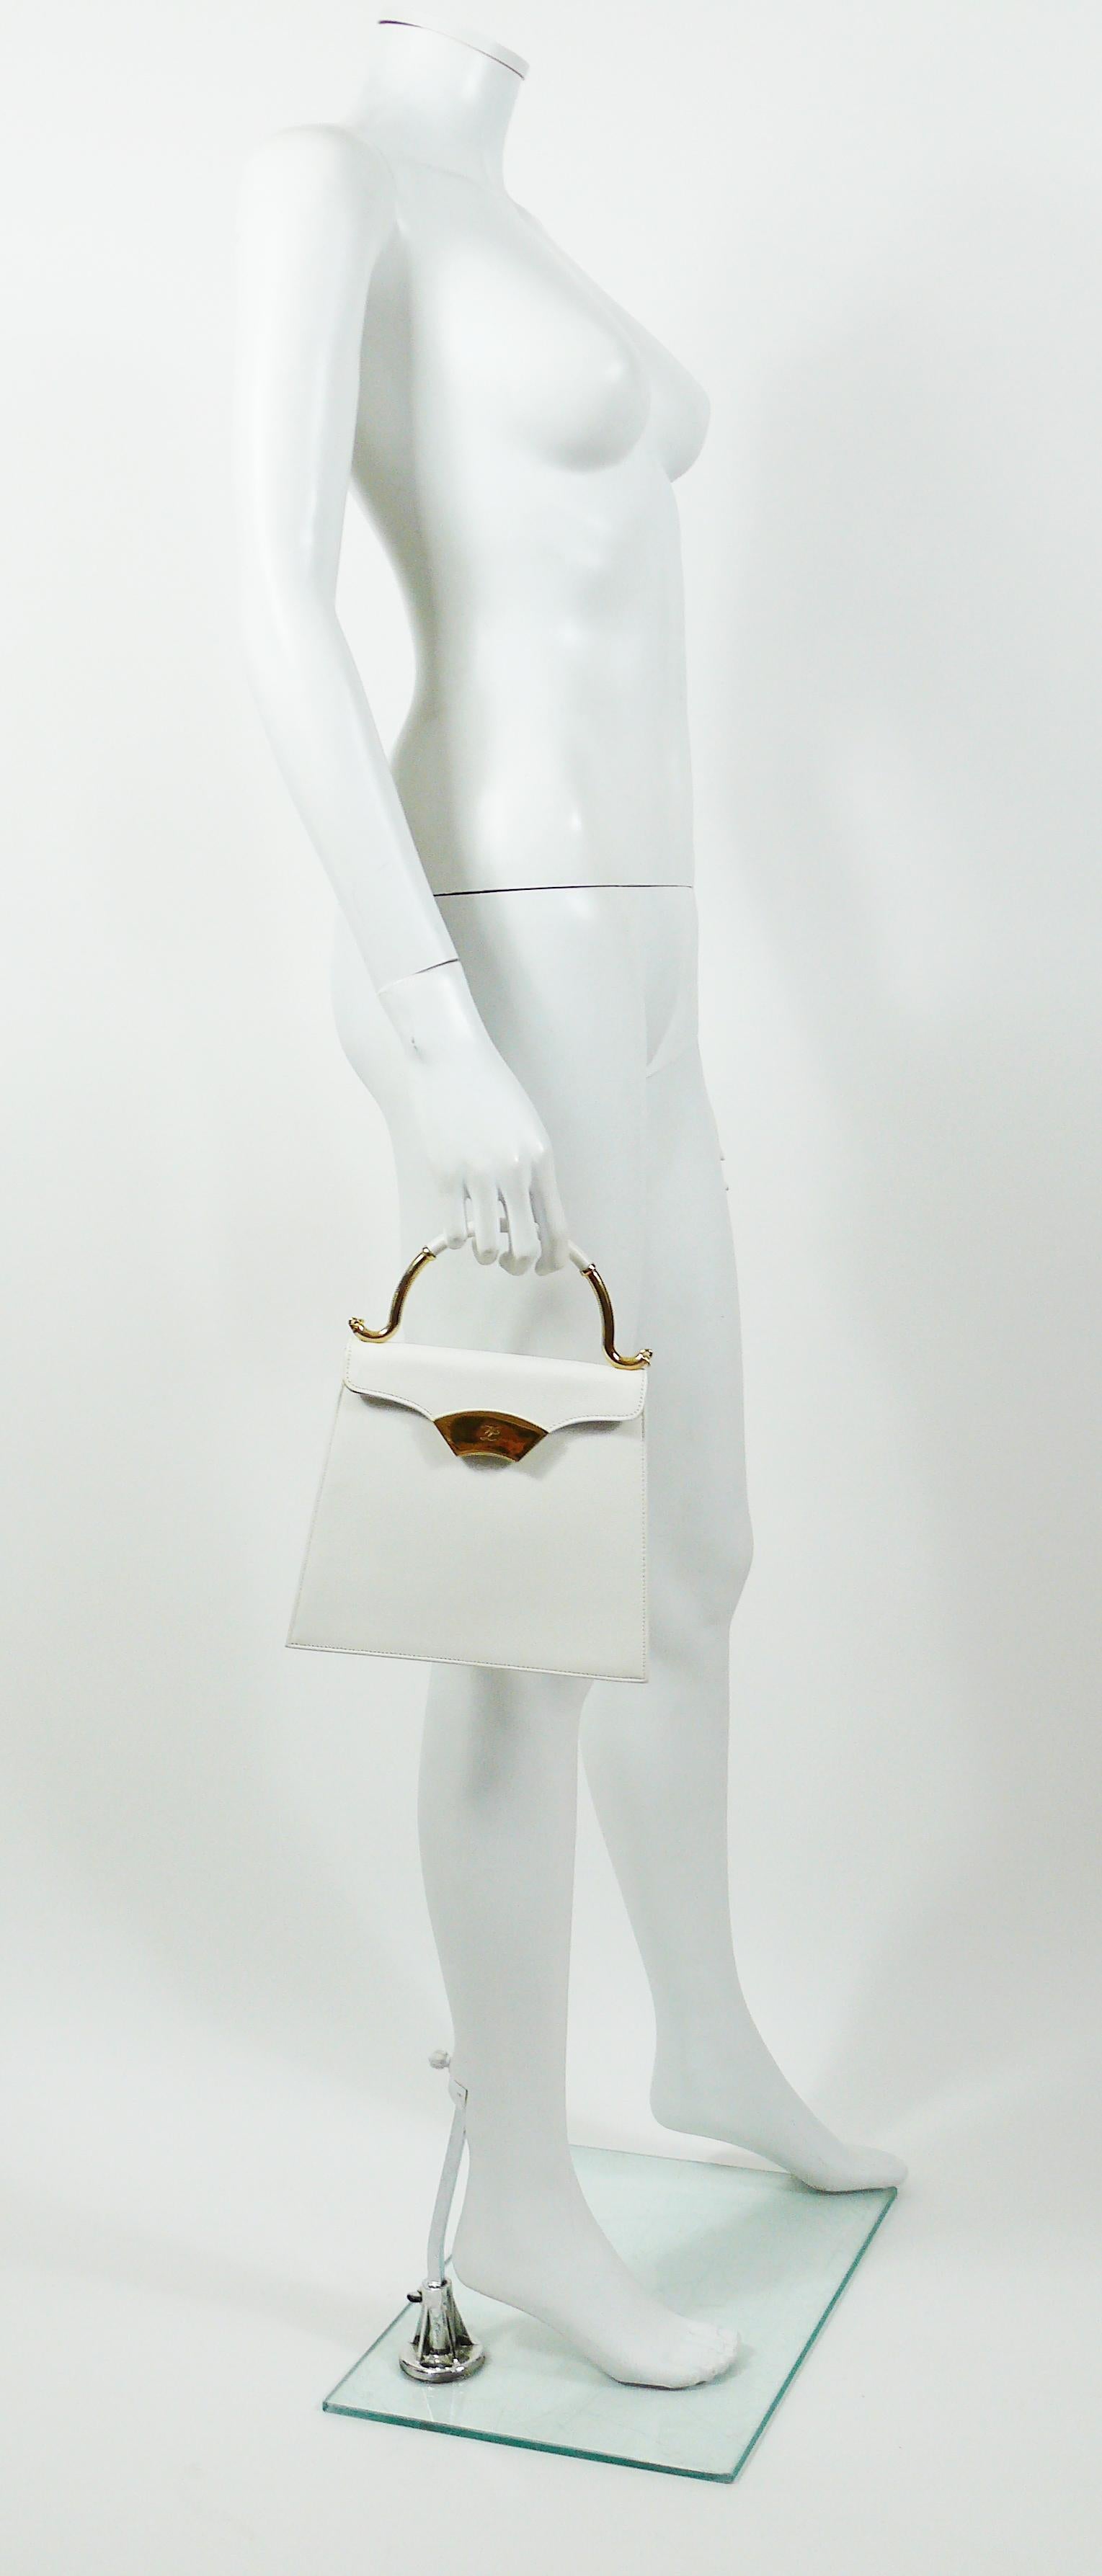 KARL LAGERFELD vintage white grained leather handbag.

This bag features :
- White grained leather body.
- Rigid top handle in gold tone metal and white leather.
- Gold tone snap closure embossed KL.
- One inner zippered pocket with gold metal fan